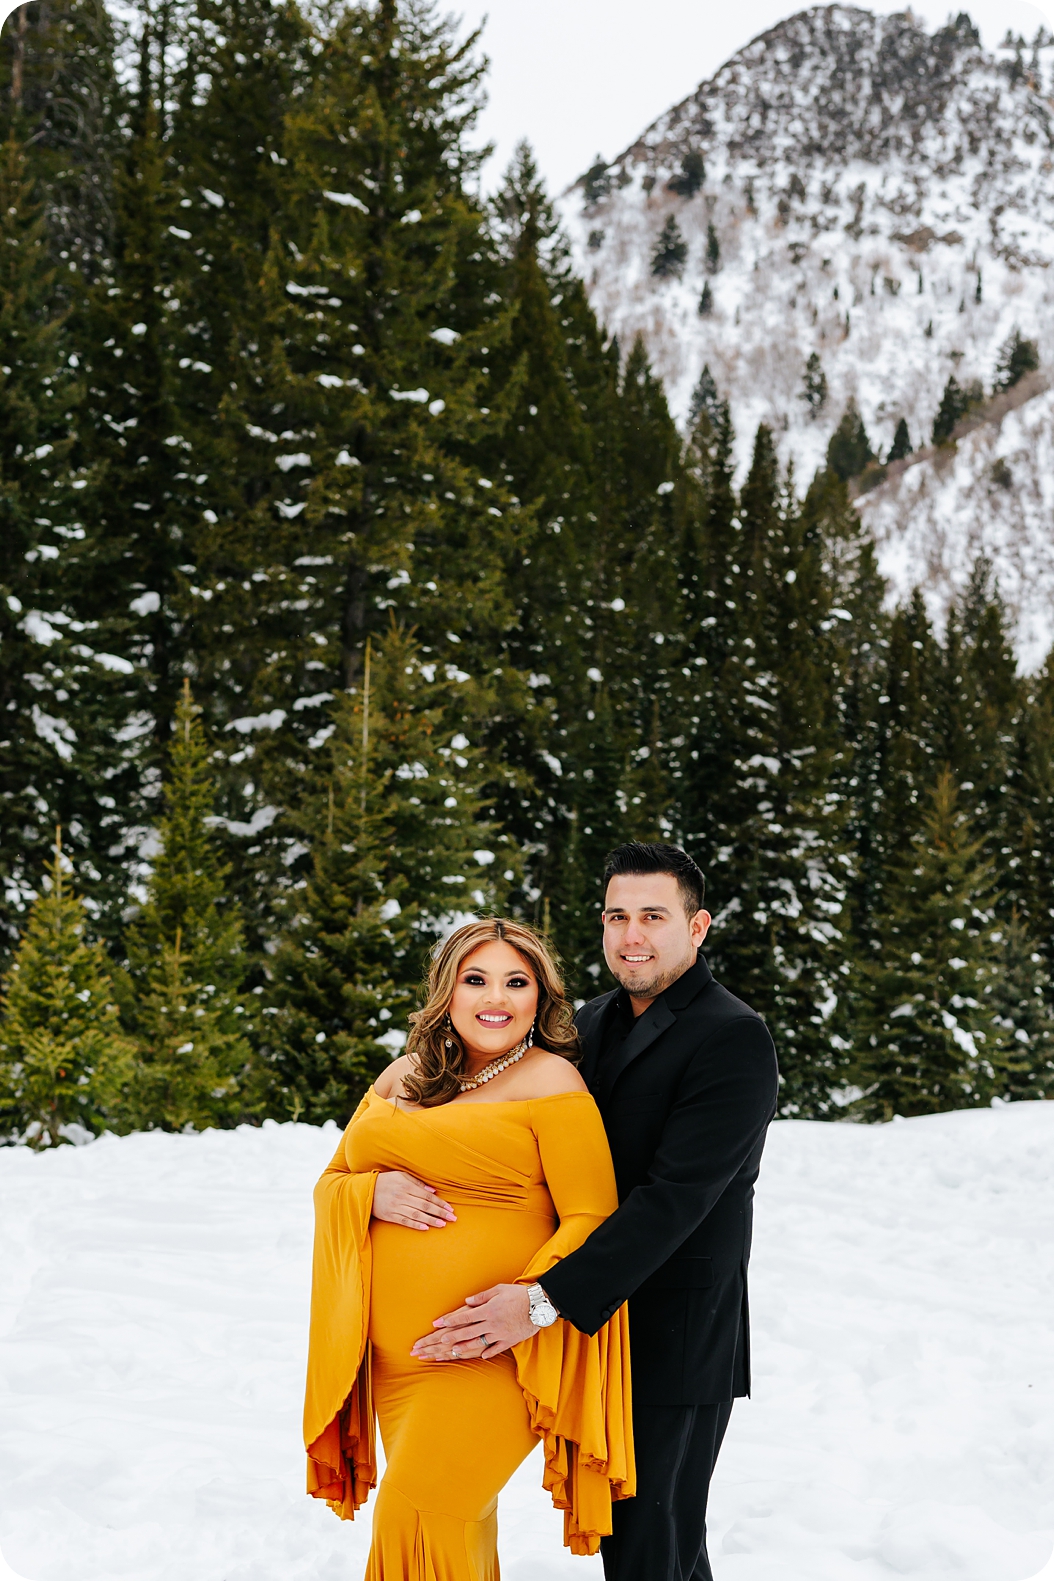 expecting parents pose in snow during Utah maternity portrait session